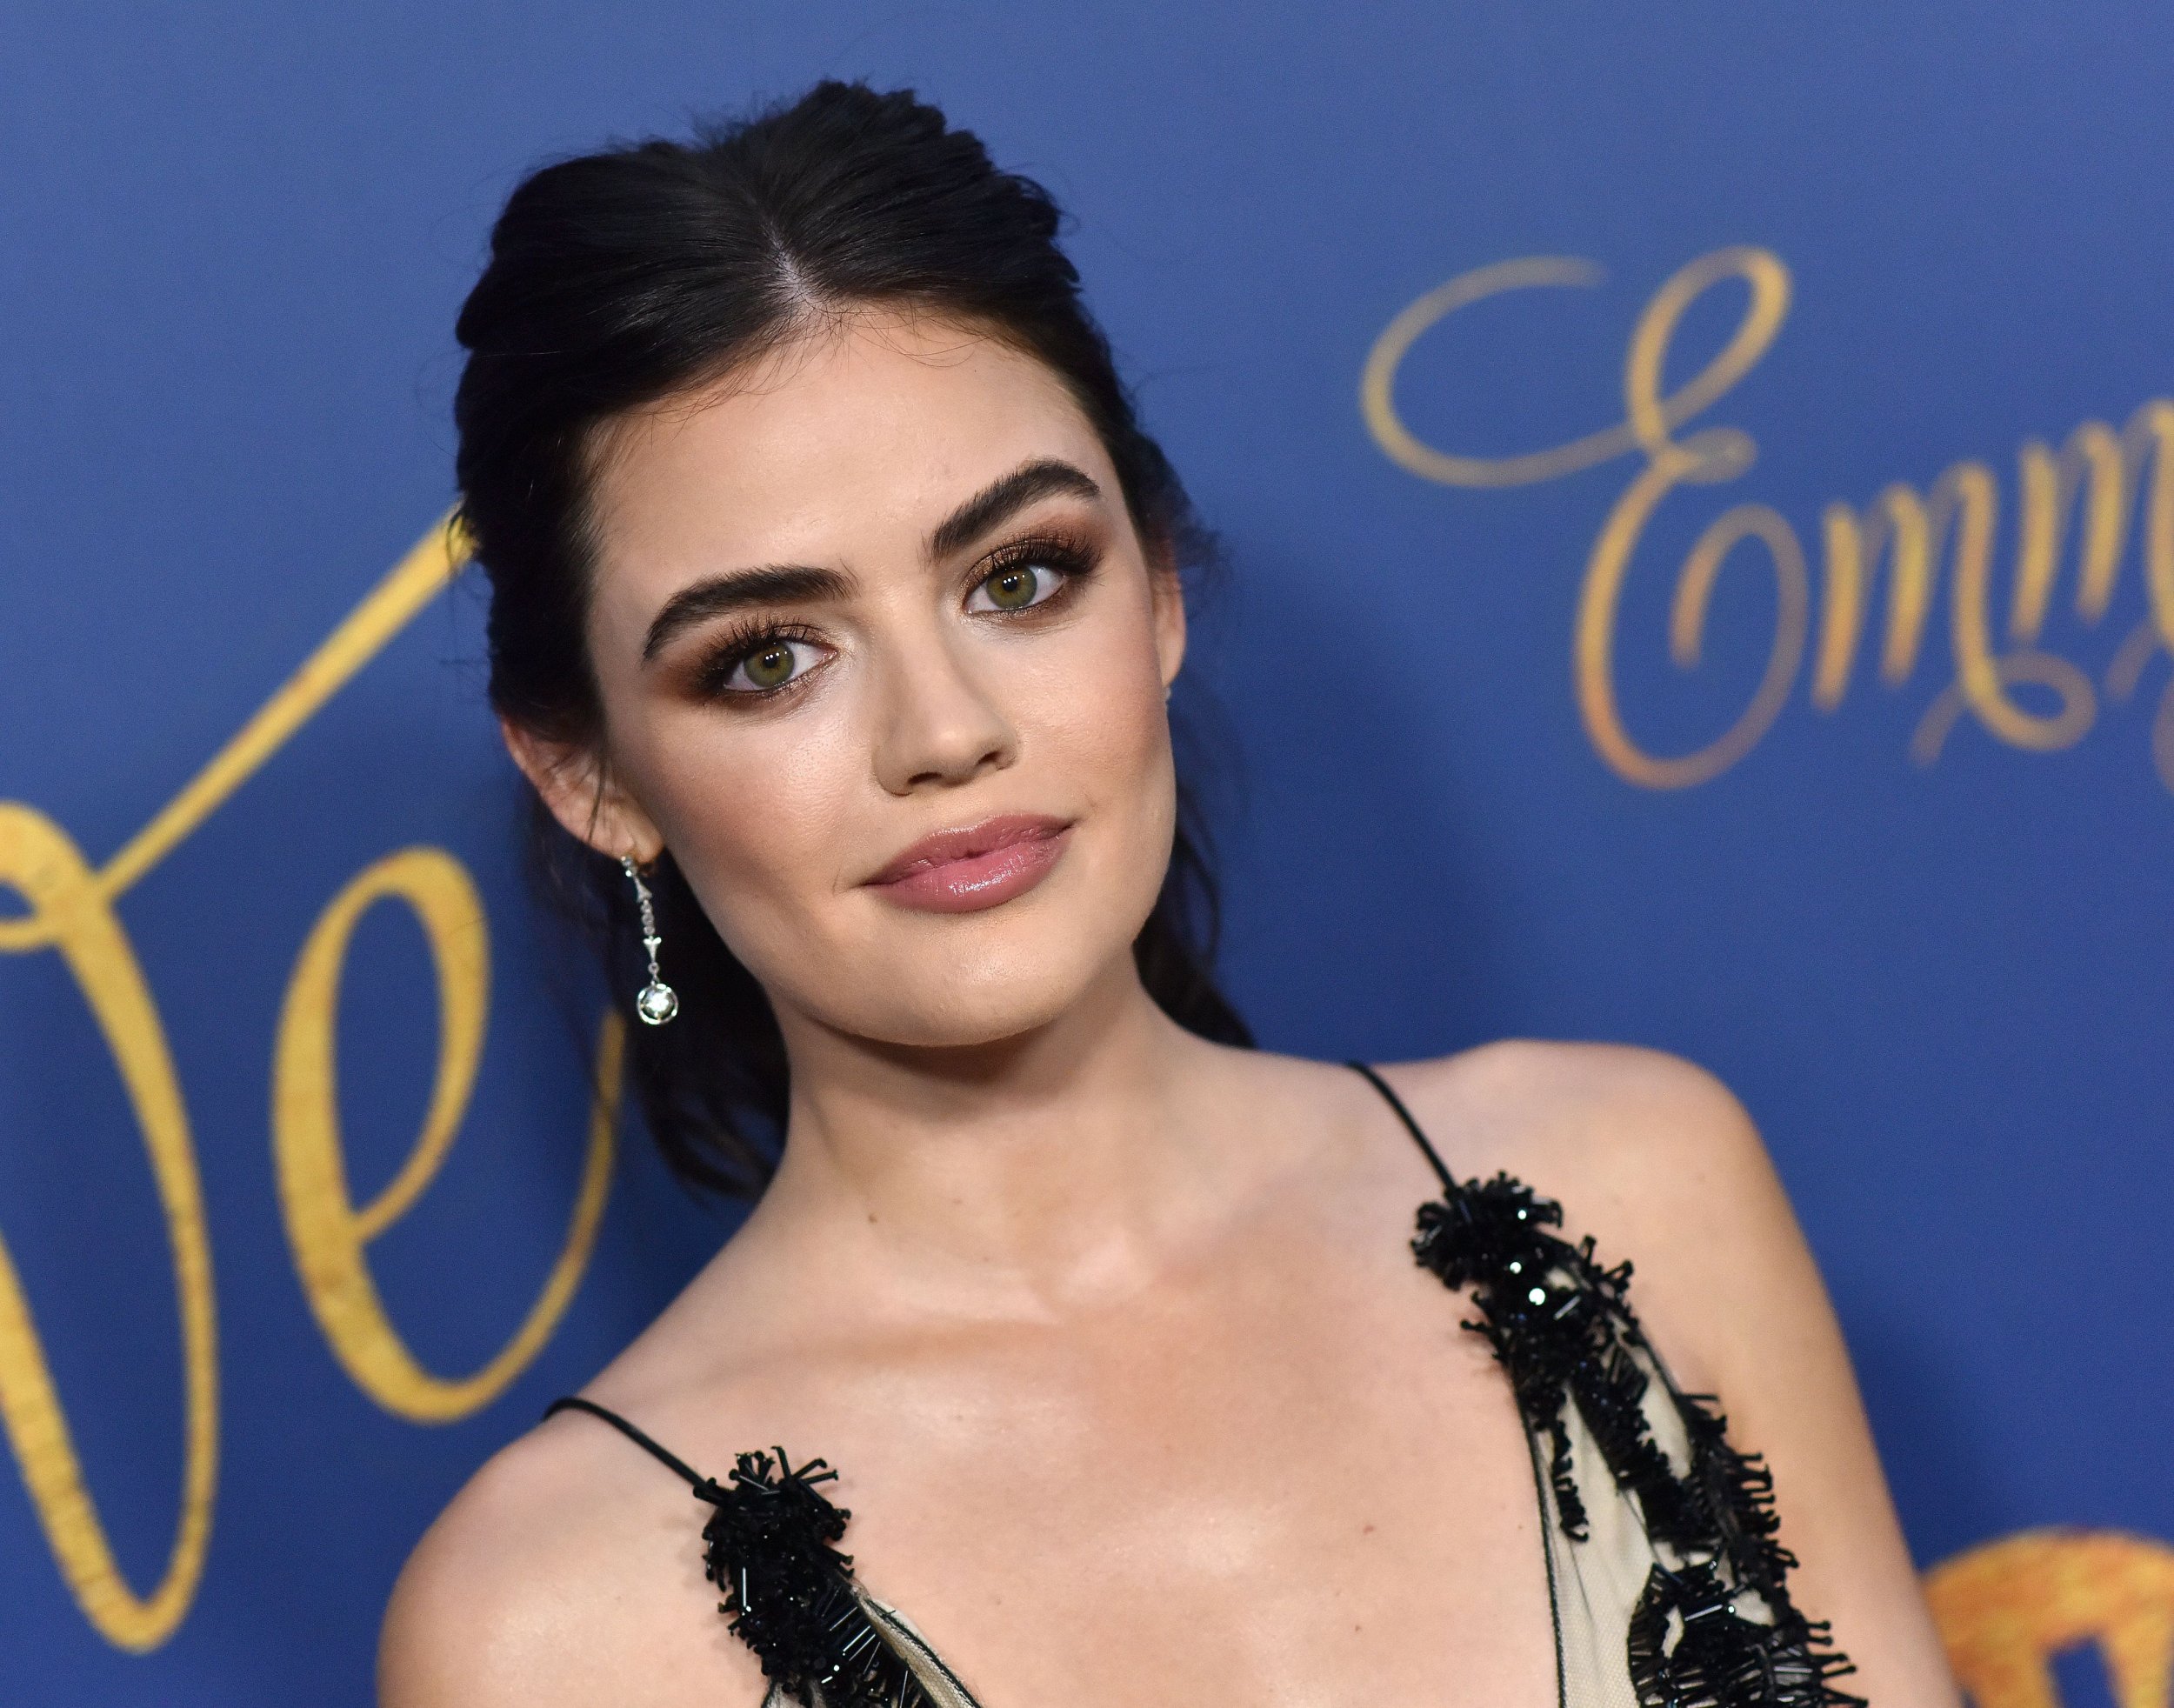 Lucy Hale interview on aspca, life sentence